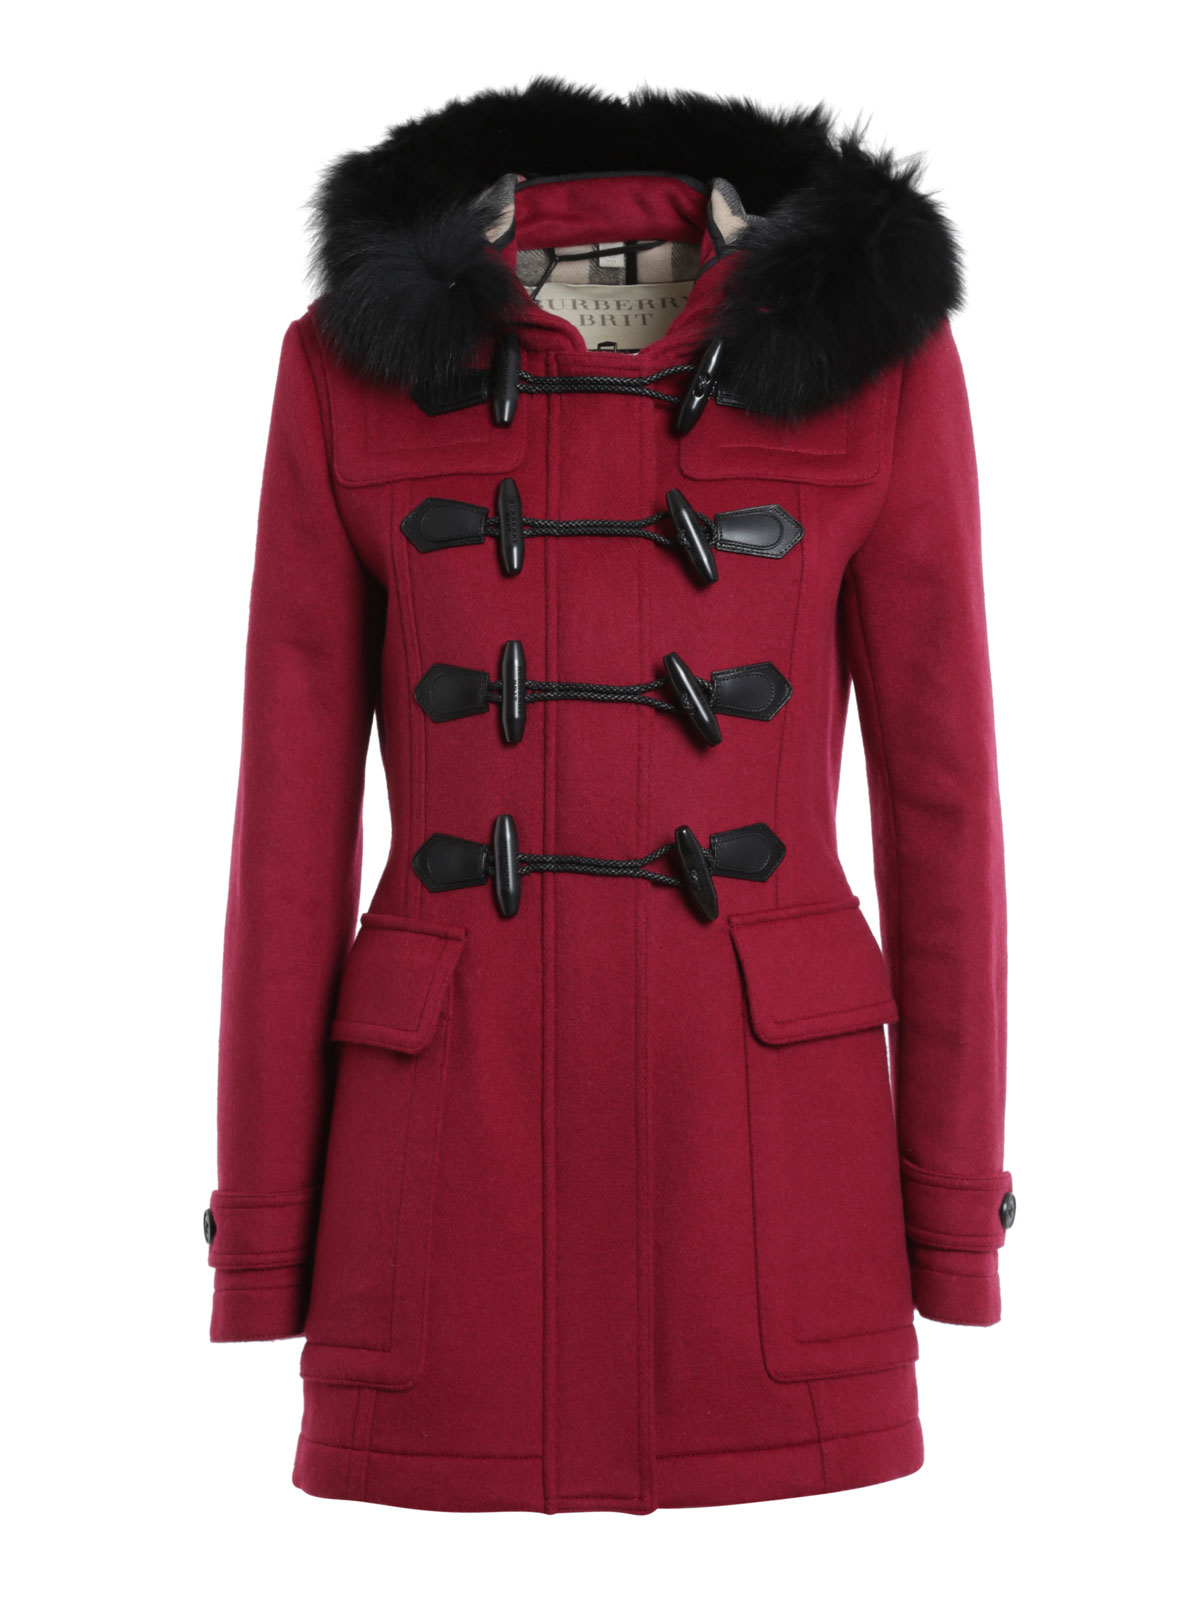 burberry coat with fur